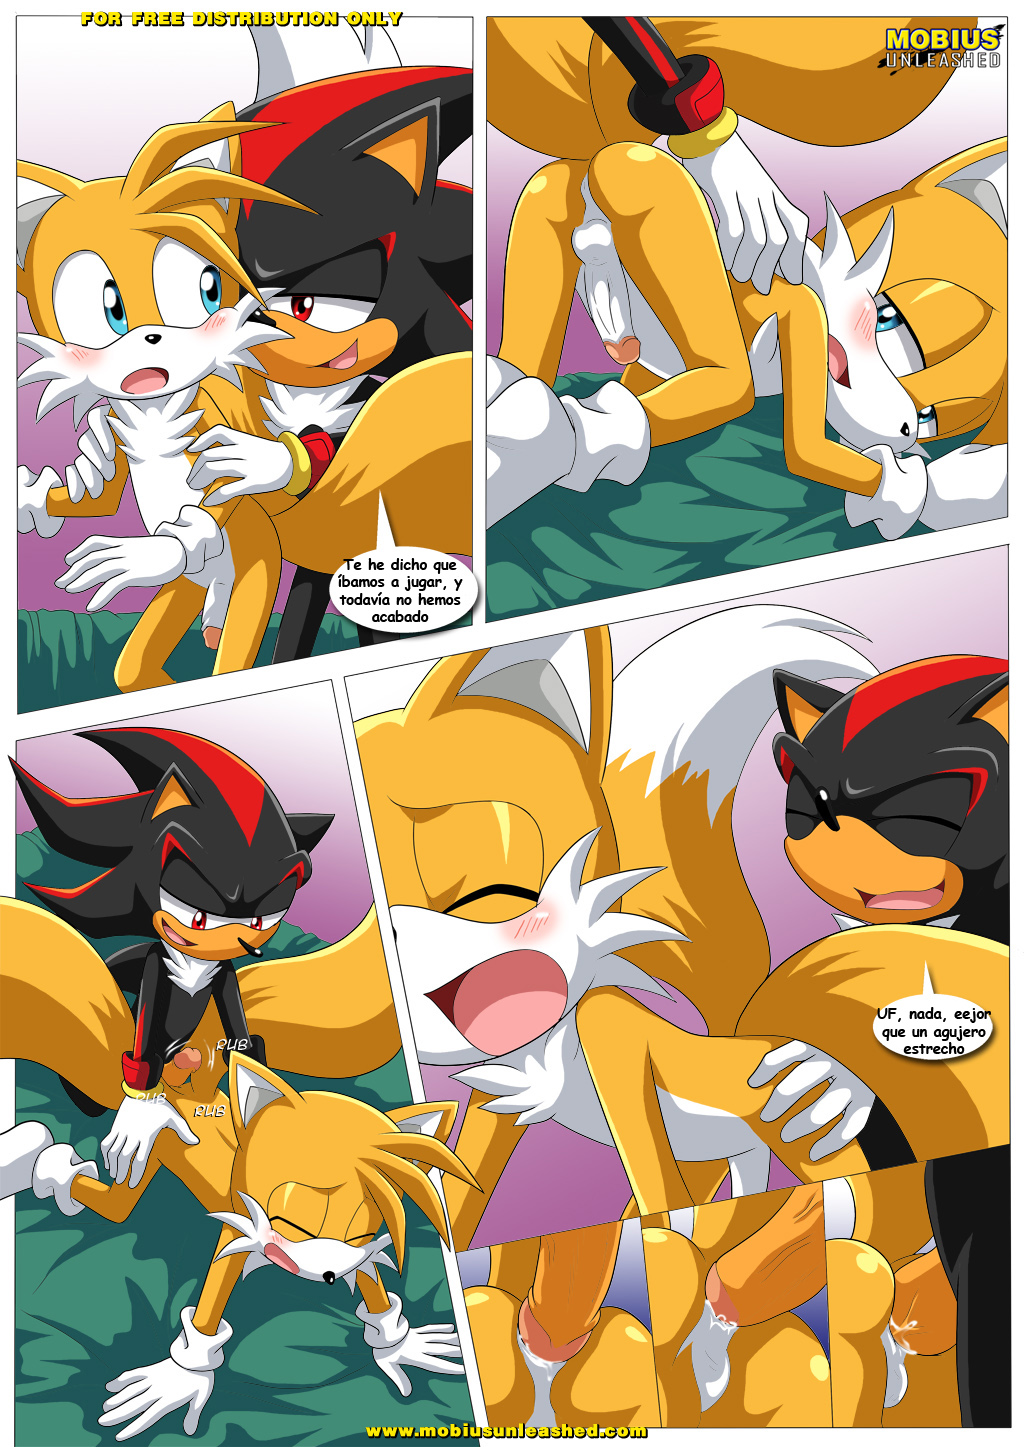 Read [palcomix] Shadow And Tails Sonic The Hedgehog [spanish] Hentai Online Porn Manga And Doujinshi